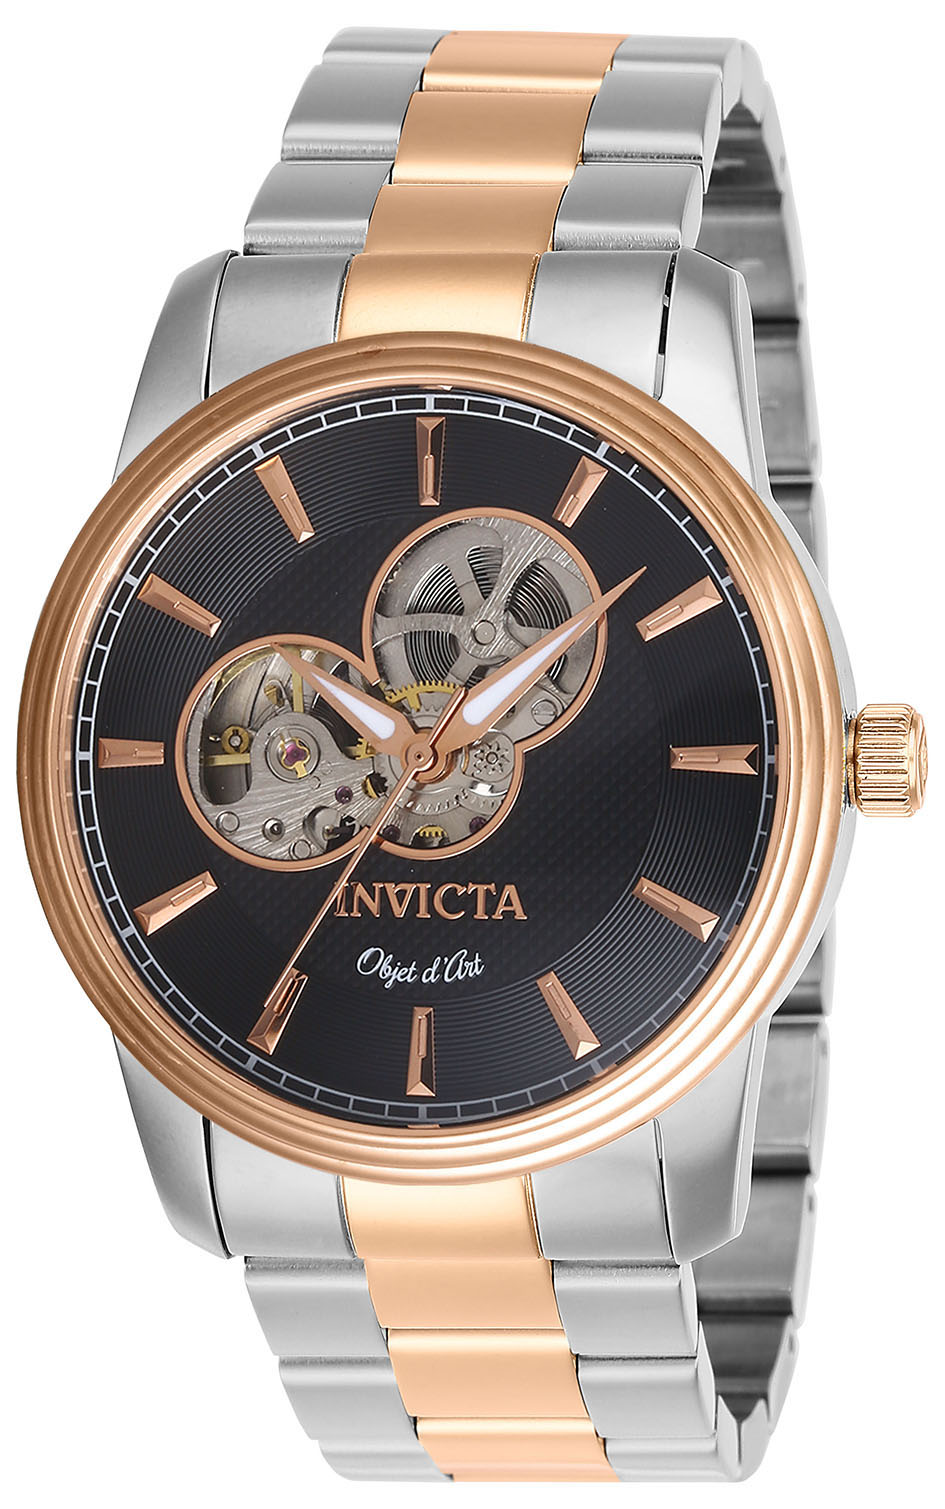 Pre-Owned Invicta Objet D Art Automatic Men's Watch - 44mm Stainless Steel Case, Stainless Steel Band, Steel, Rose Gold (AIC-27563)